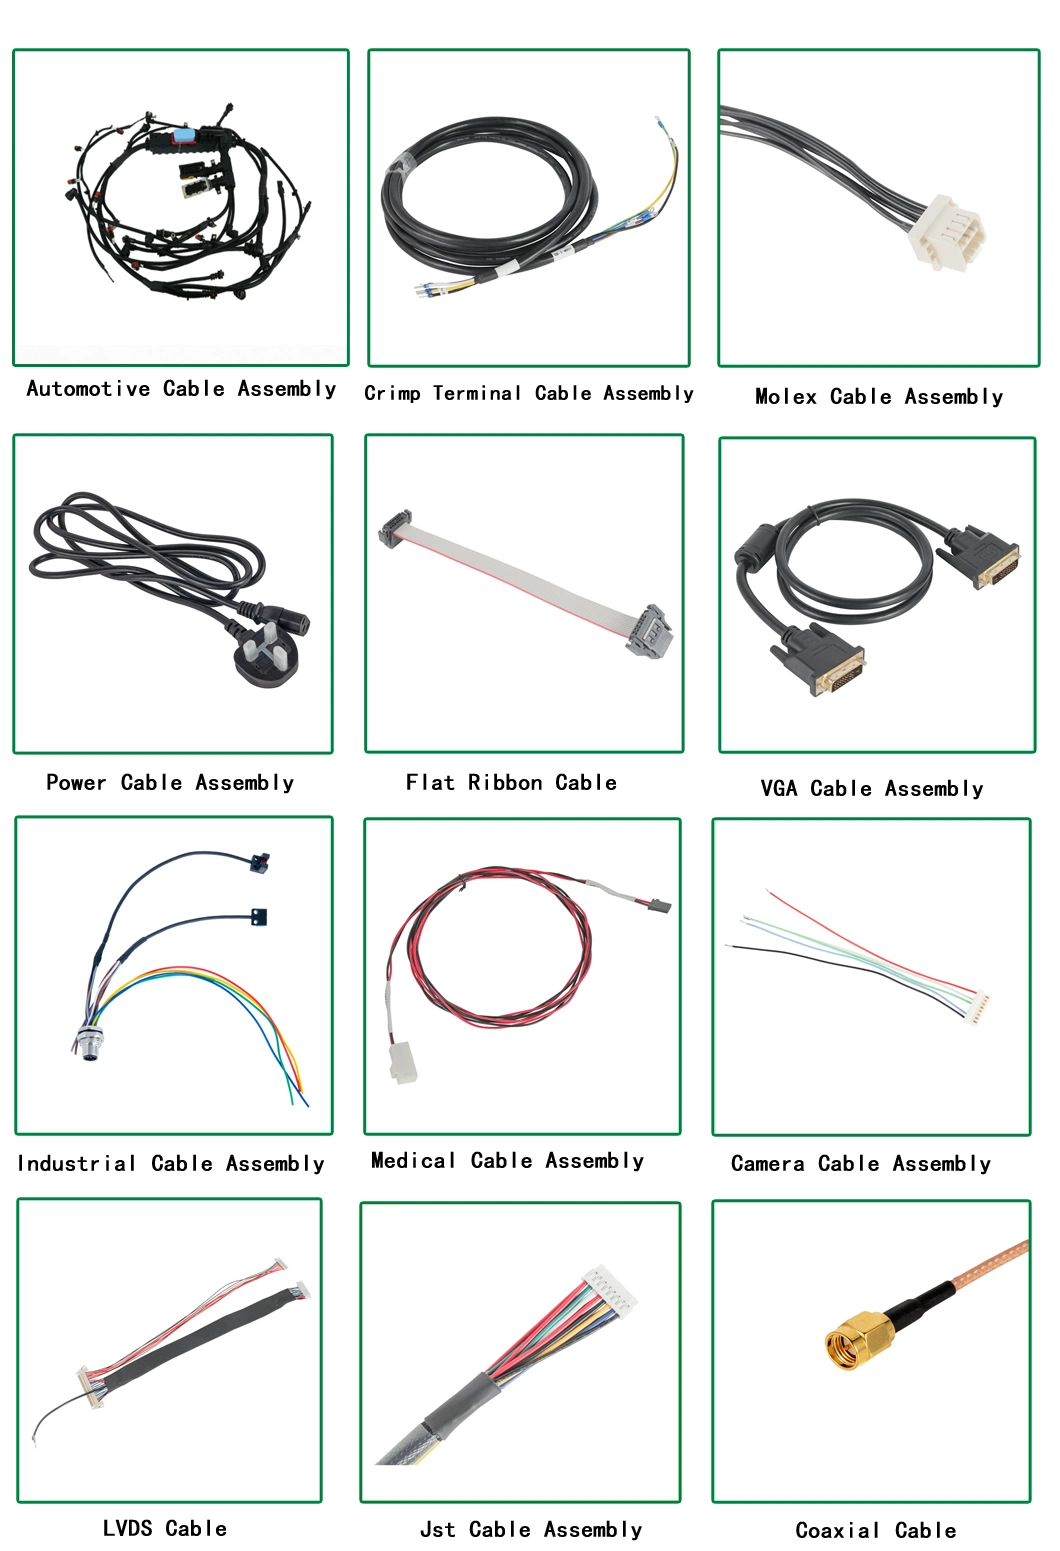 Electrical Wiring Harness for Industrial Automatic Control Systems